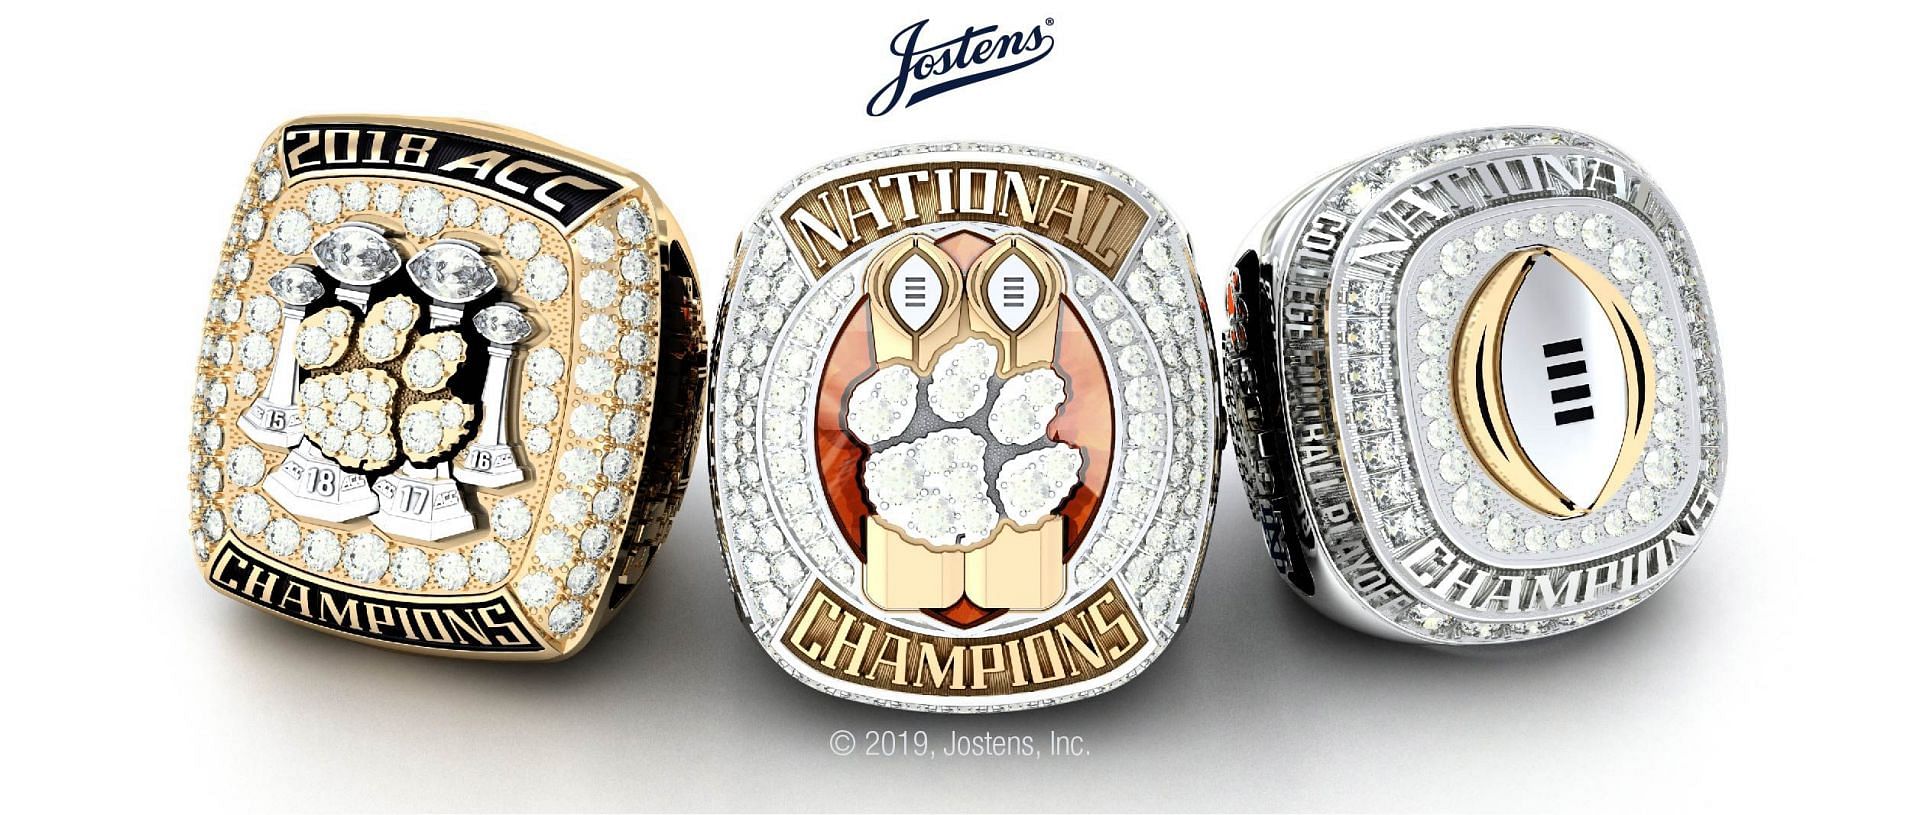 College Football Championship Ring (Picture Source: @Jostens (X))